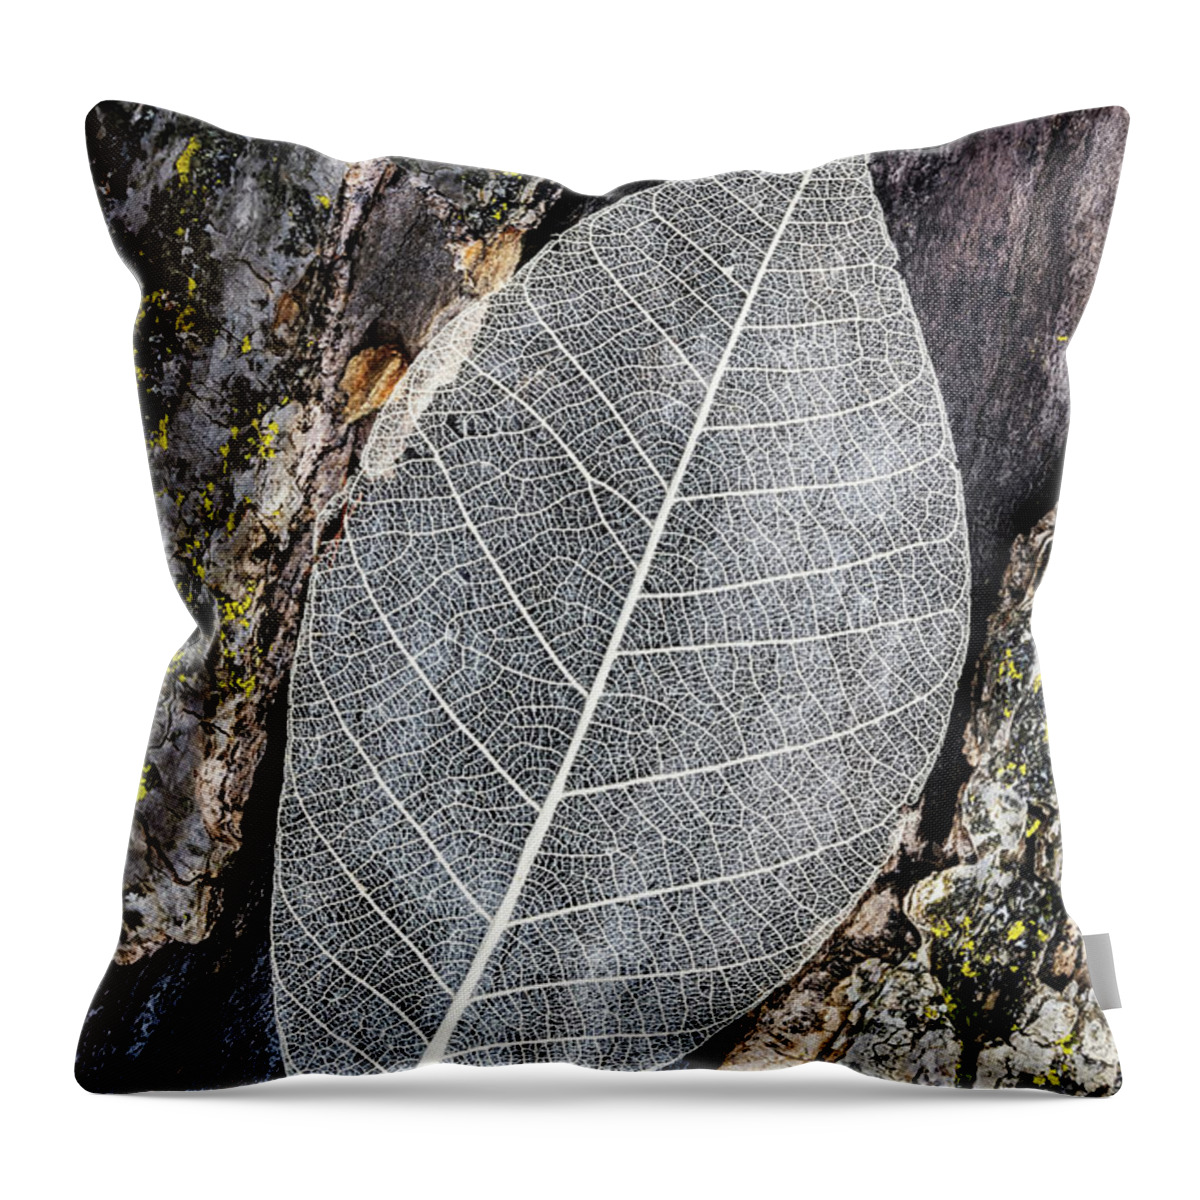 Skeleton Leaf Throw Pillow featuring the photograph Skeleton Leaf On Tree Trunk by Gary Slawsky